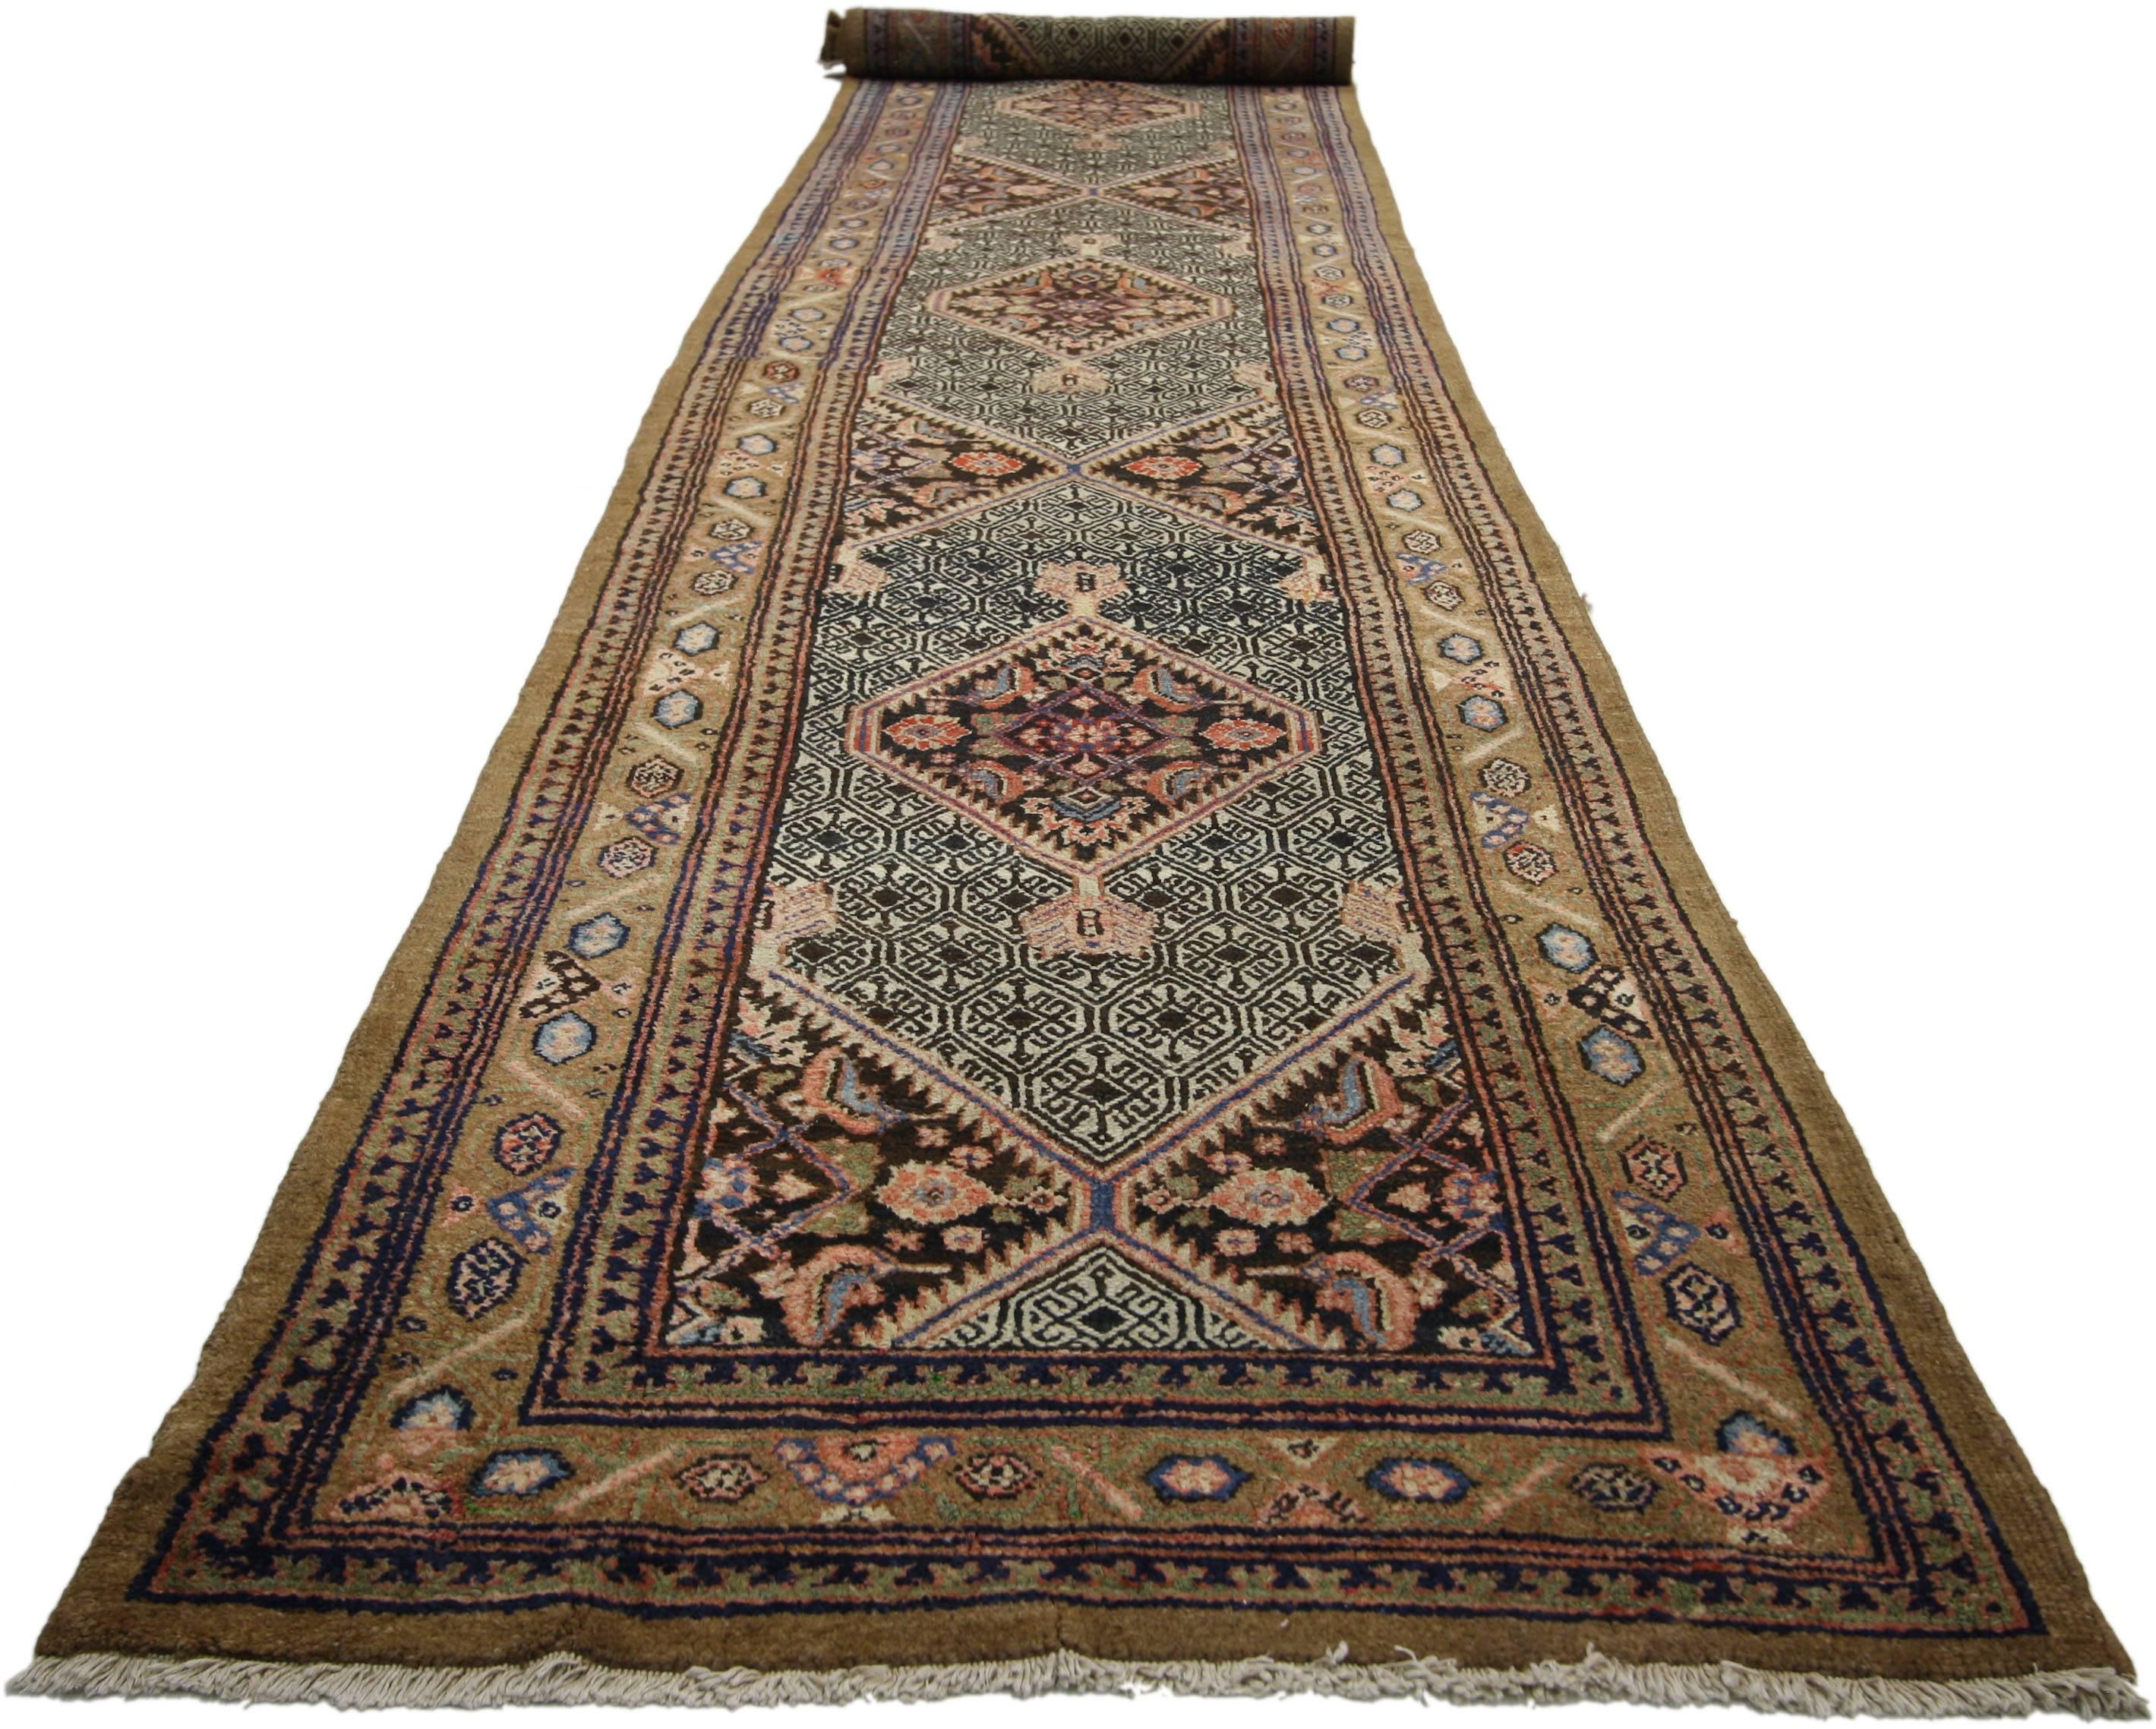 Hand-Knotted Camel Hair Antique Persian Malayer Extra-Long Runner with Arts and Crafts Style